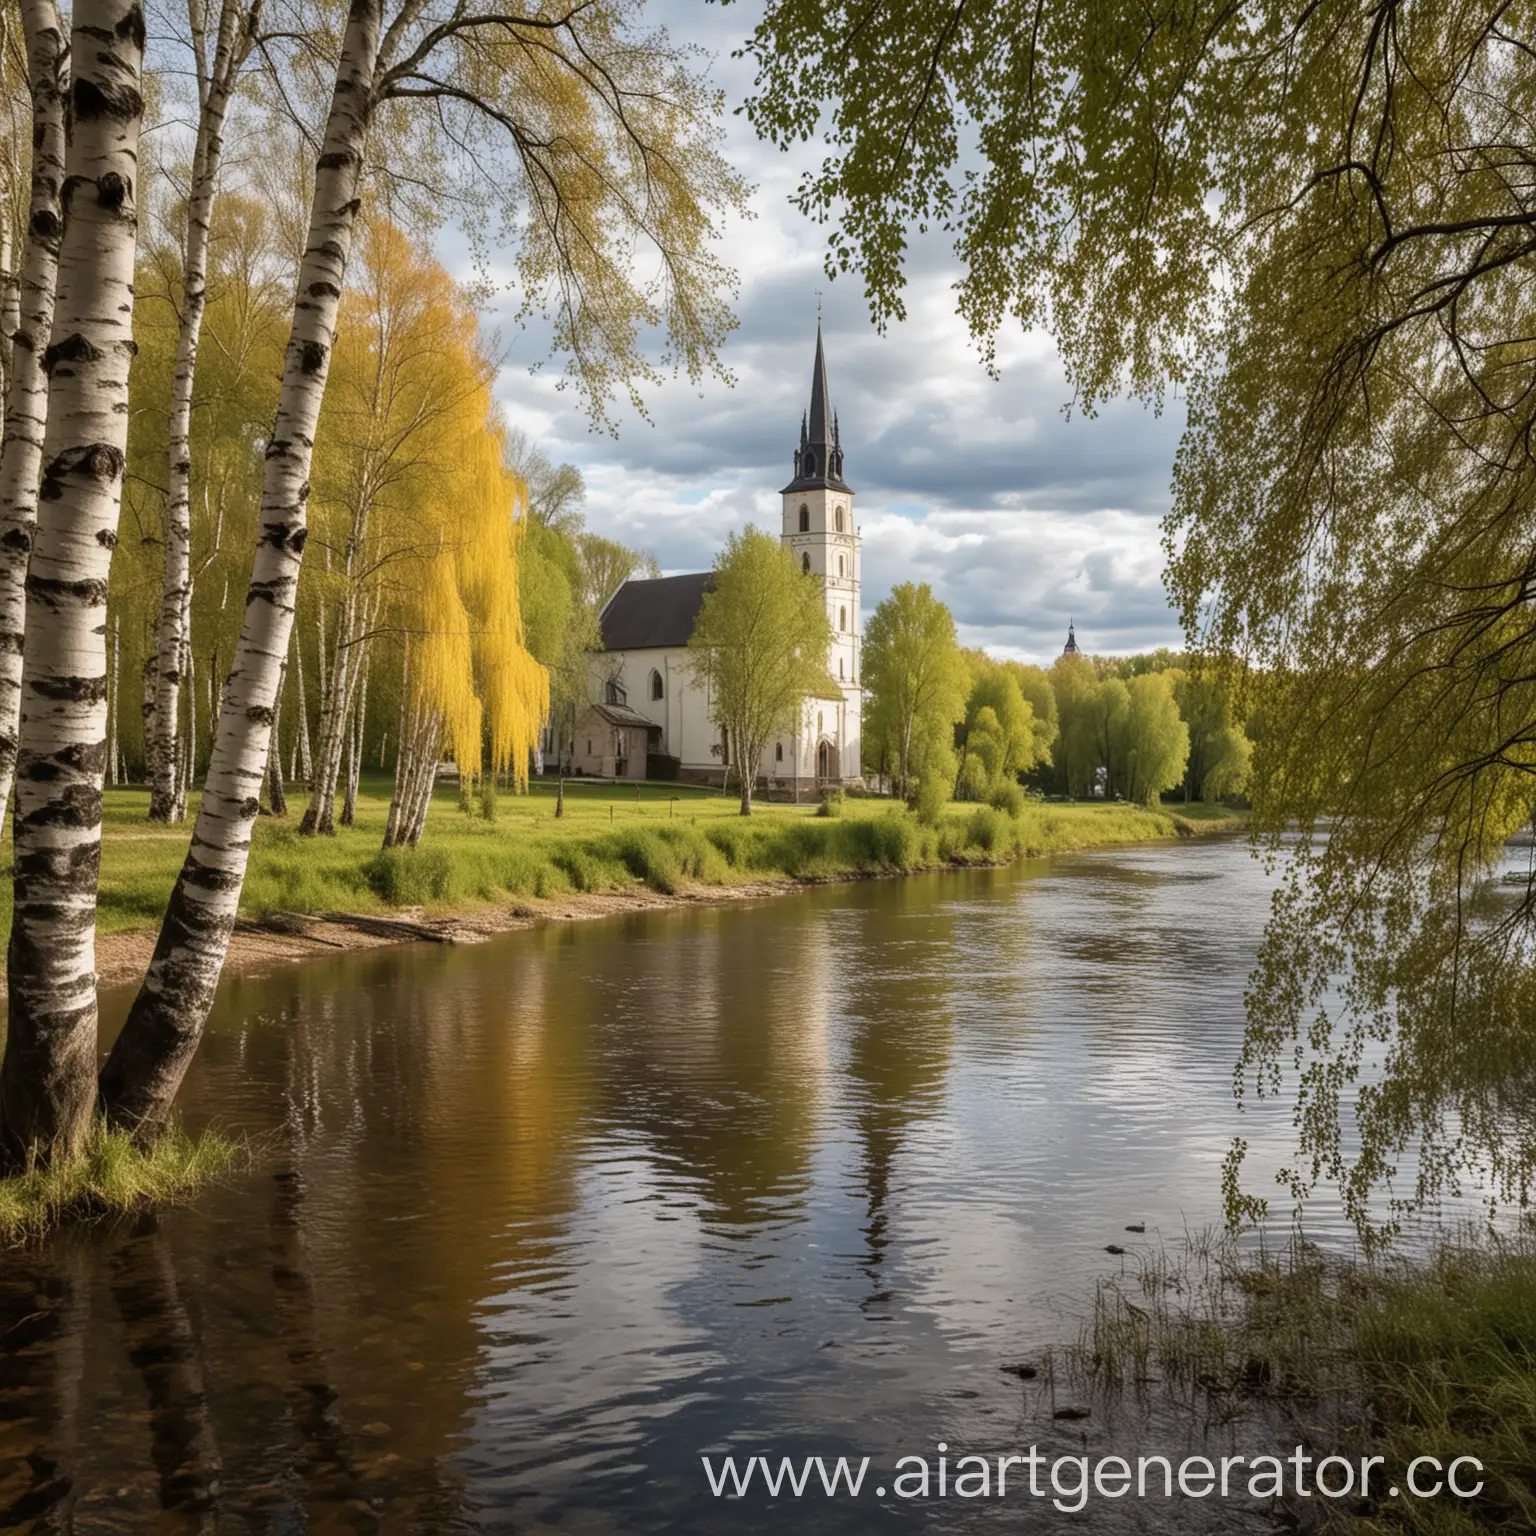 On the foreground there is a river, on the background a church with a birch tree on the side